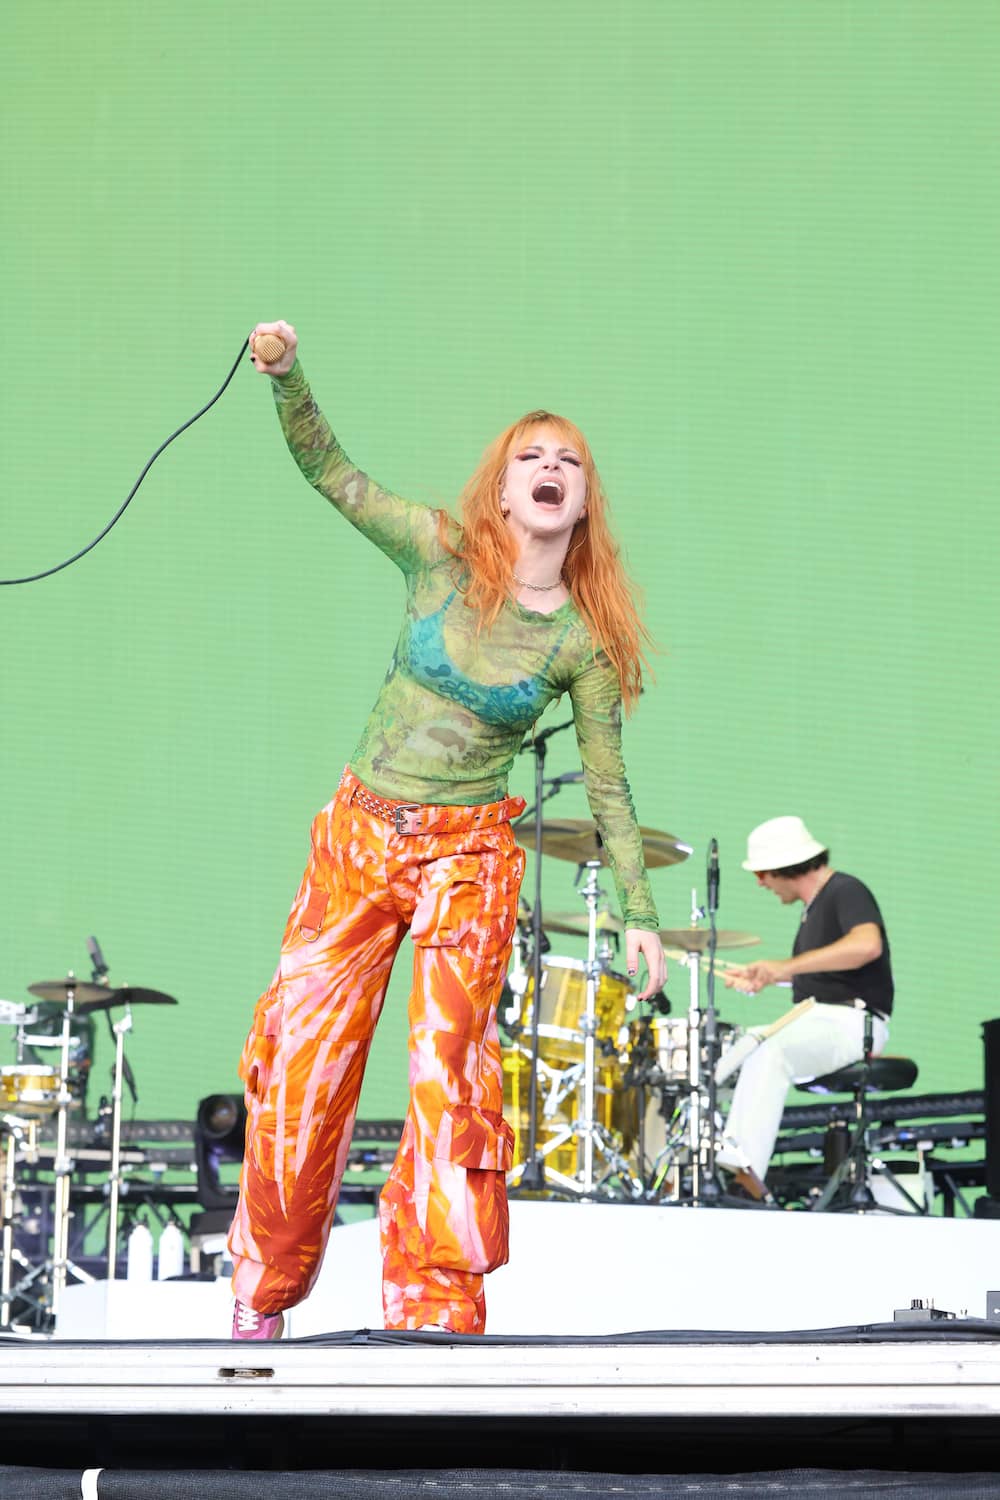 Paramore shows the heart in their song – Twin Cities